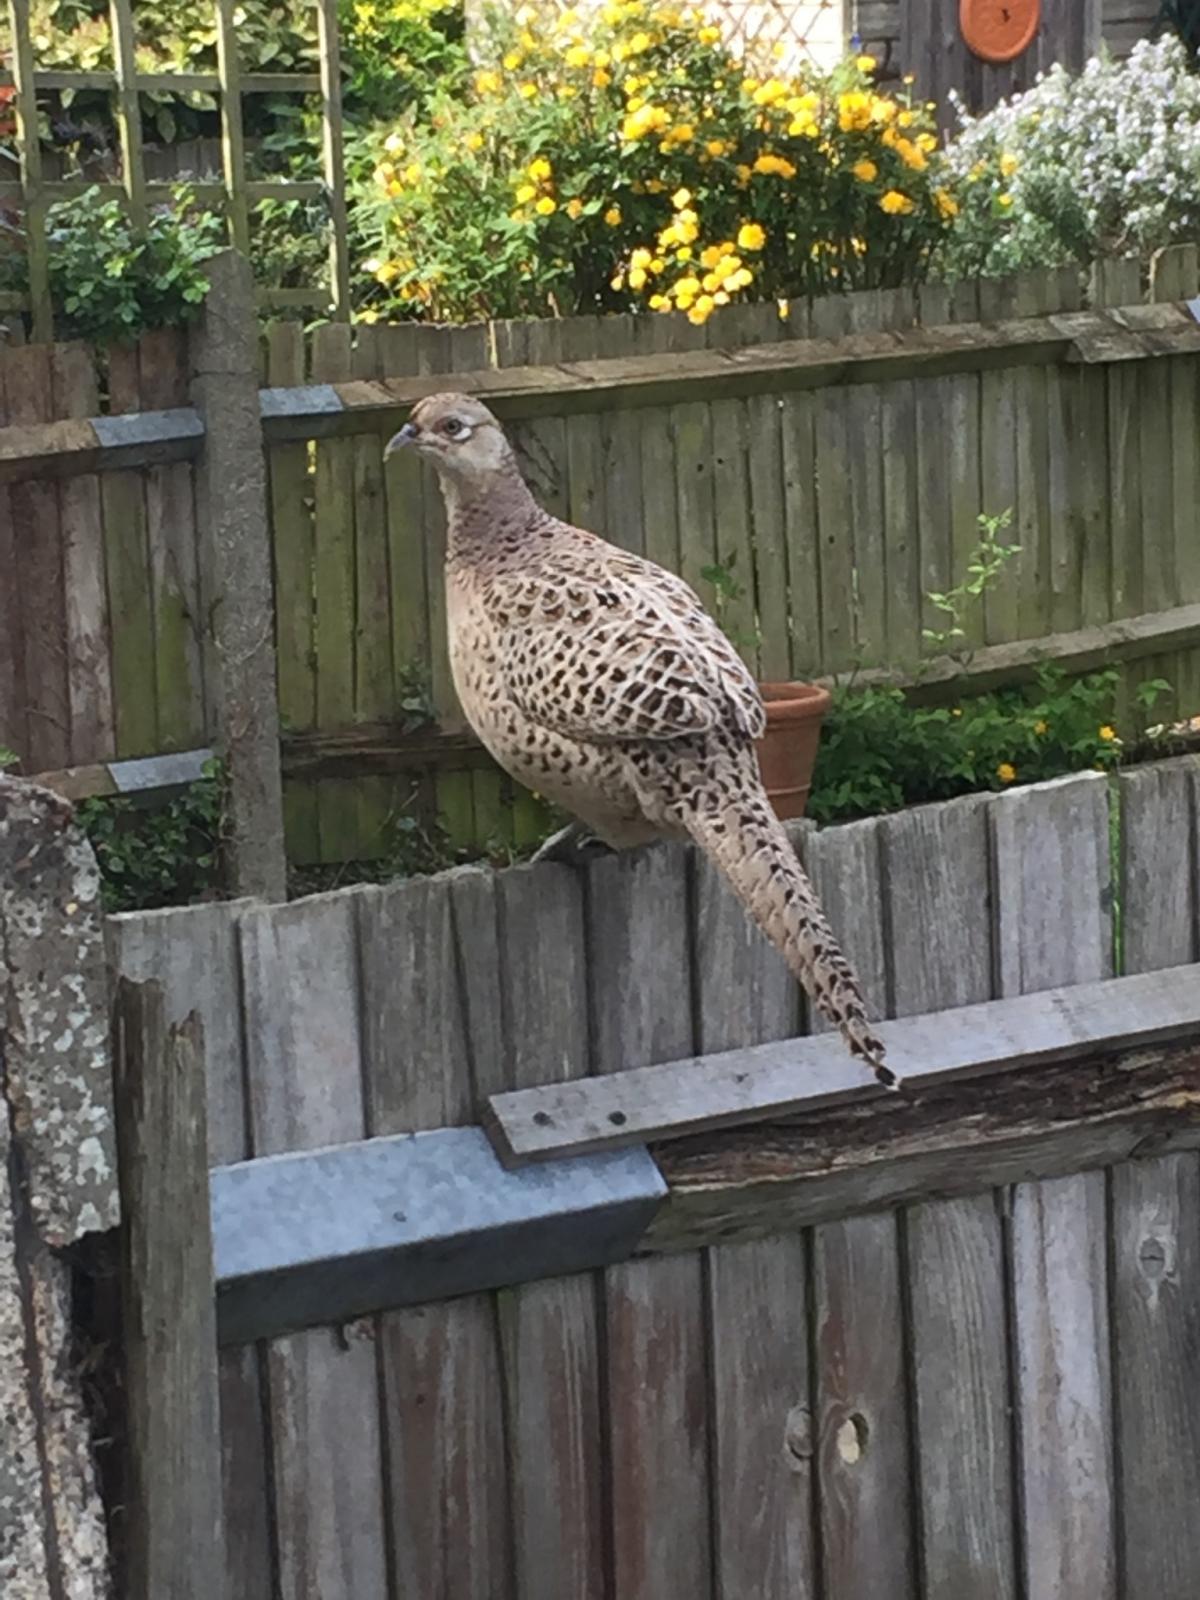 Mark Piggott took this photo of a pheasant that appeared in his garden a couple of weeks ago in Tolworth Road. He wondered how it managed to get there...